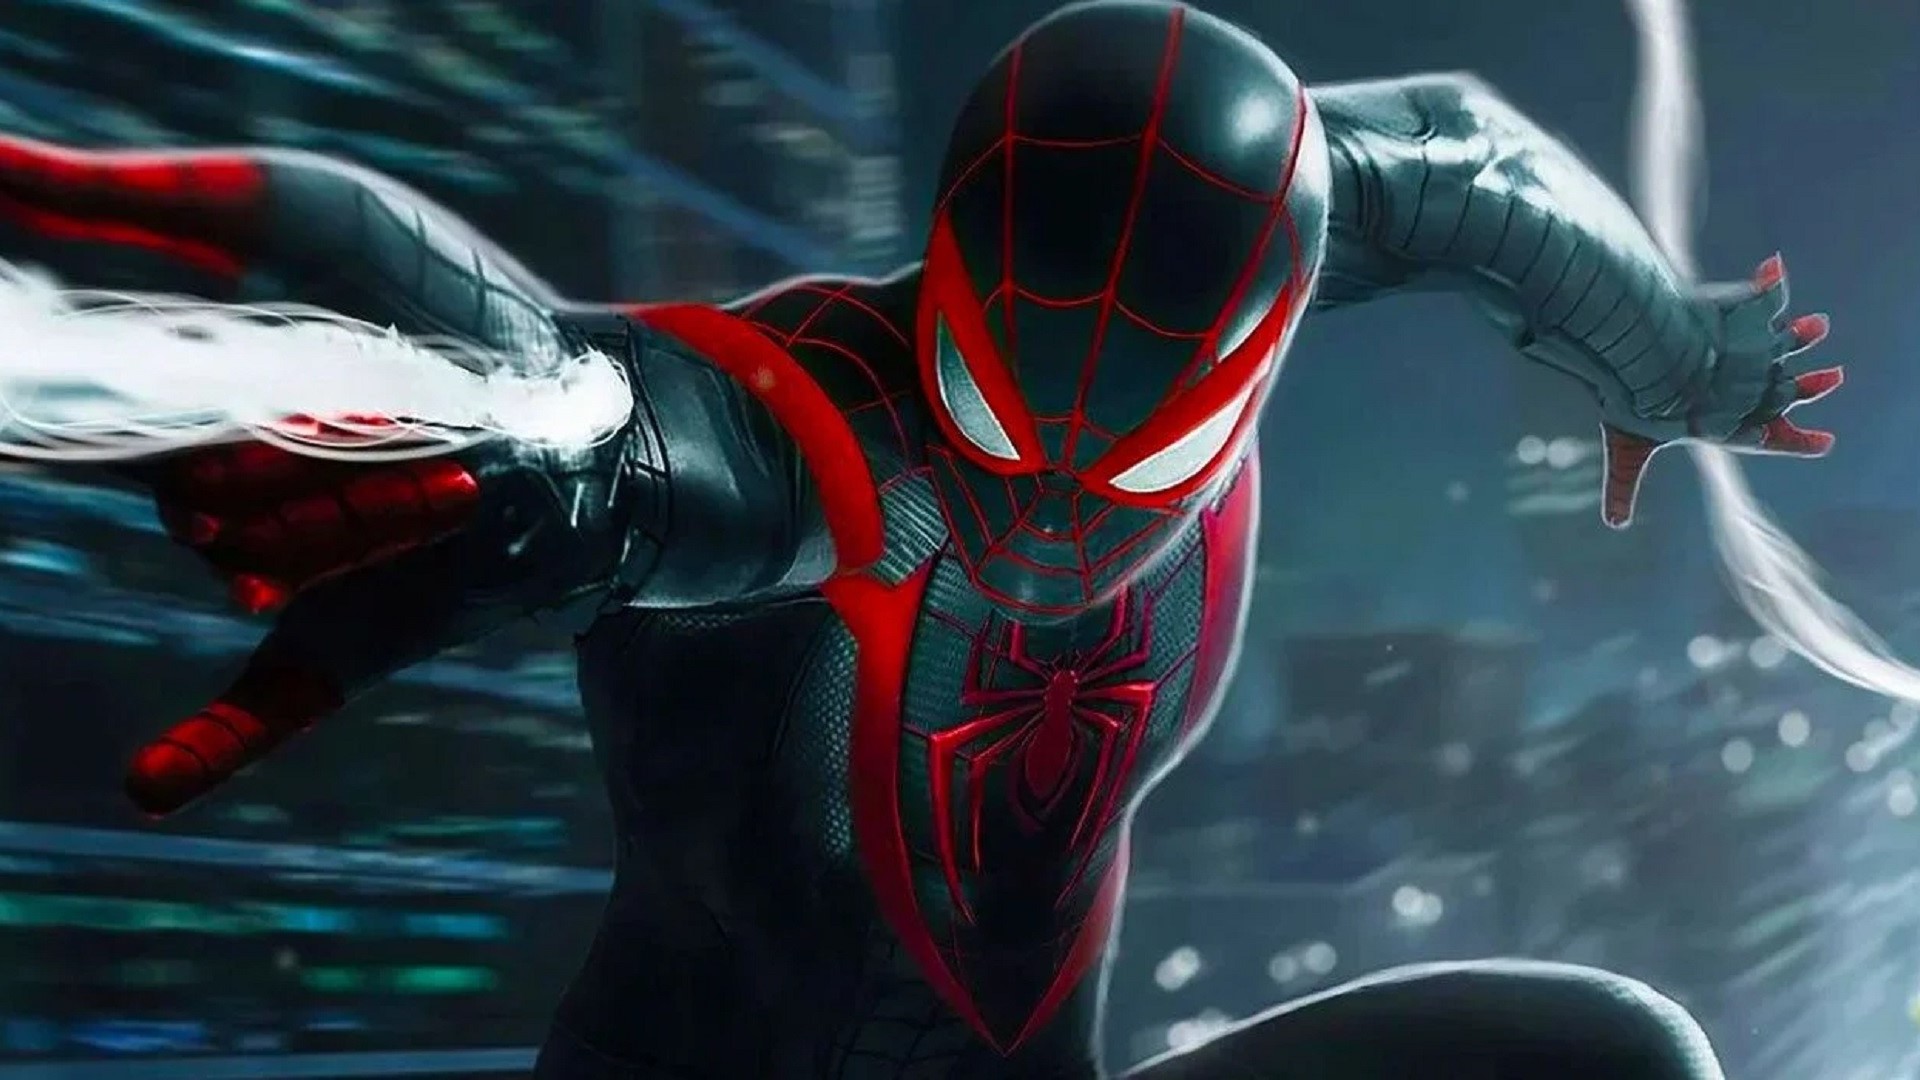 Marvel's Spider-Man: Miles Morales Reveals Into the Spider-Verse Suit